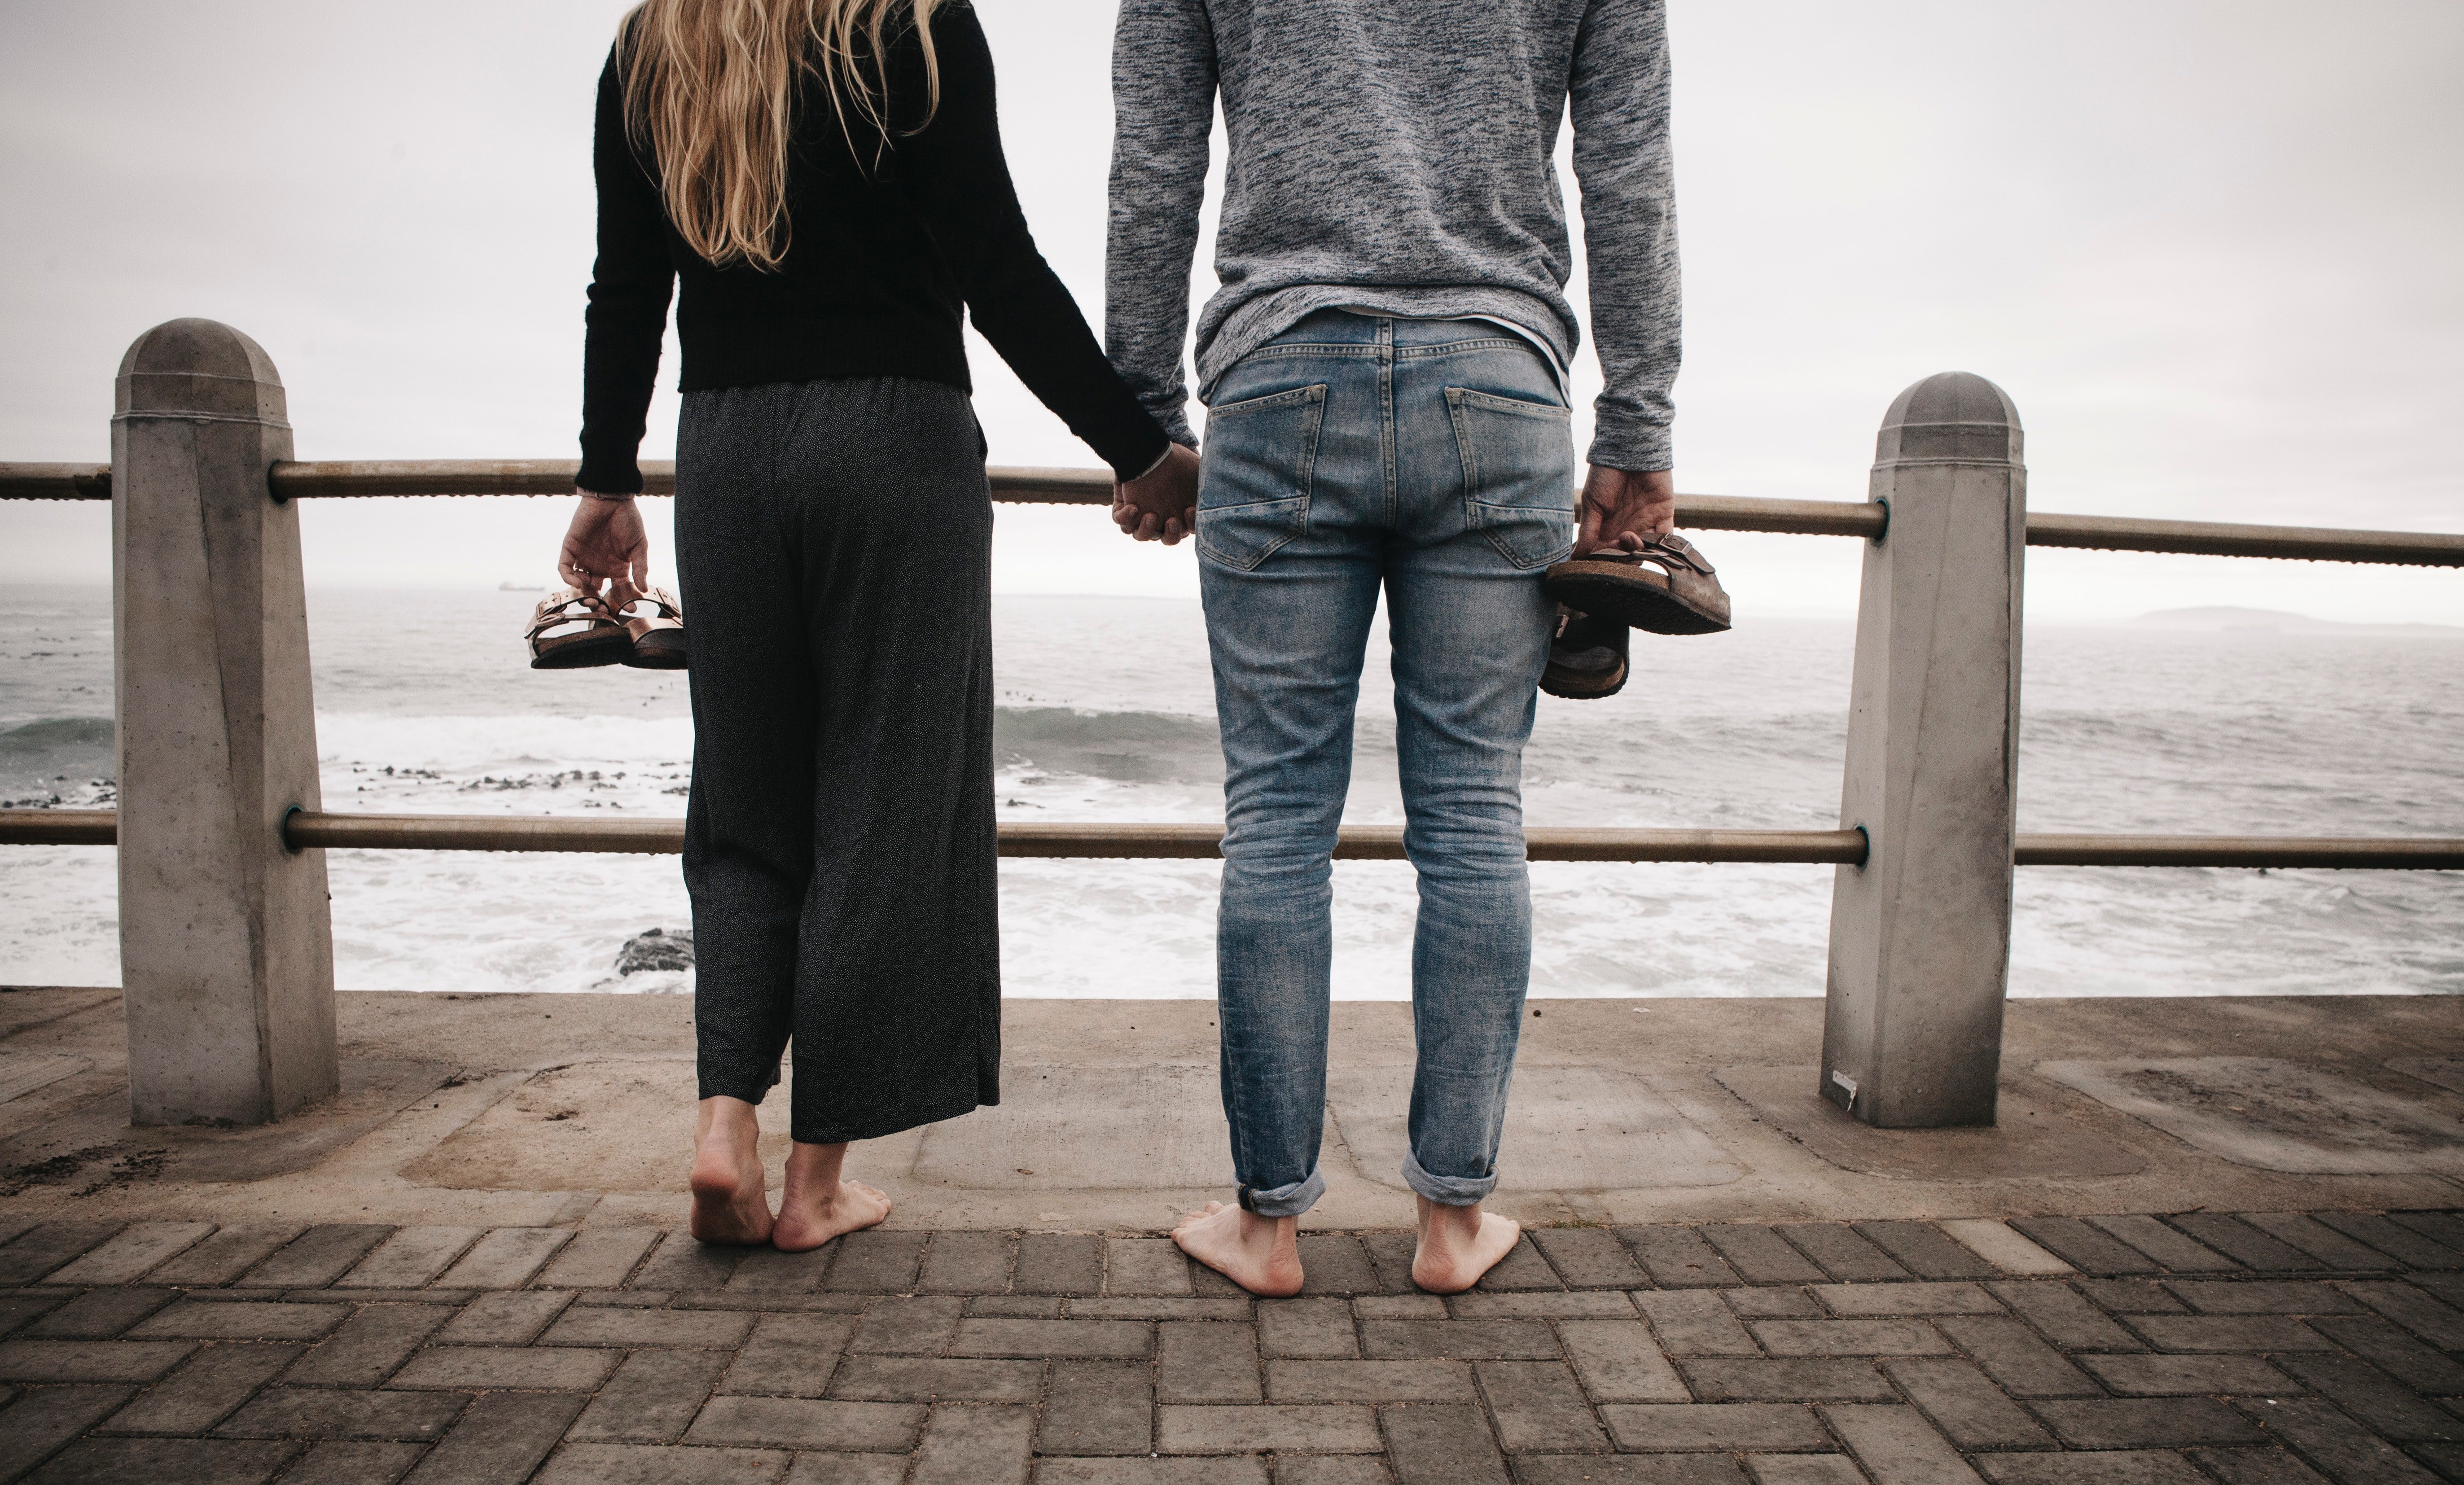 Olivia and Josh went for a walk and enjoyed each other's company. | Source: Unsplash